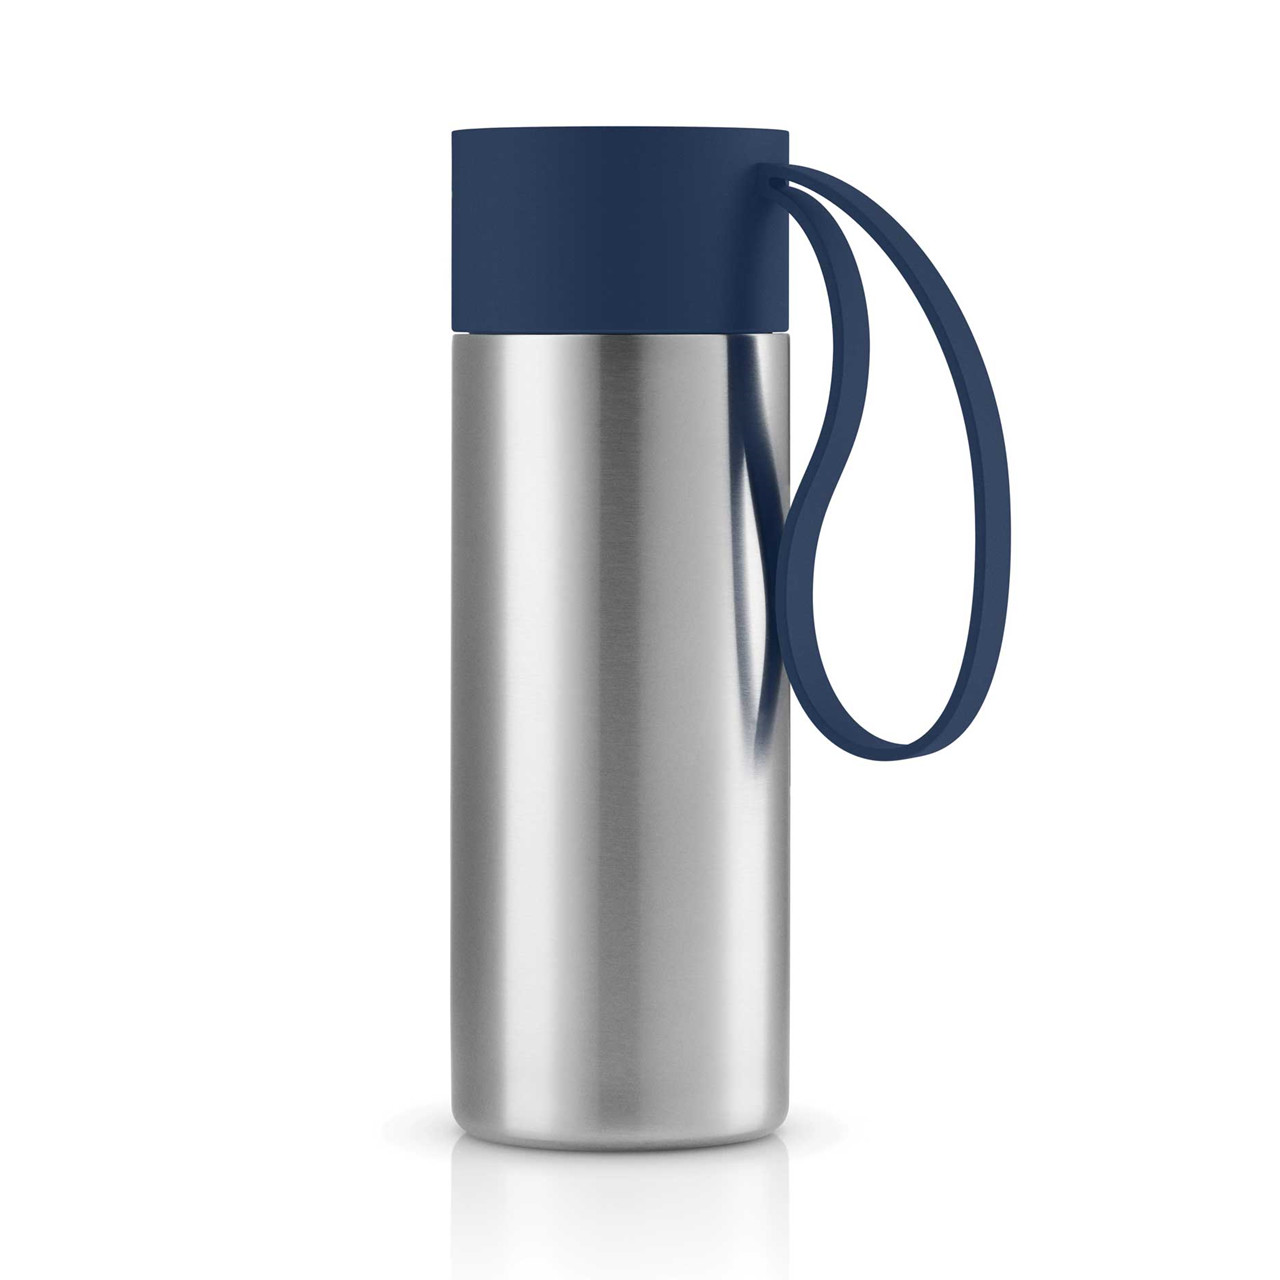 EVA SOLO To go cup 0,35 L navy blue